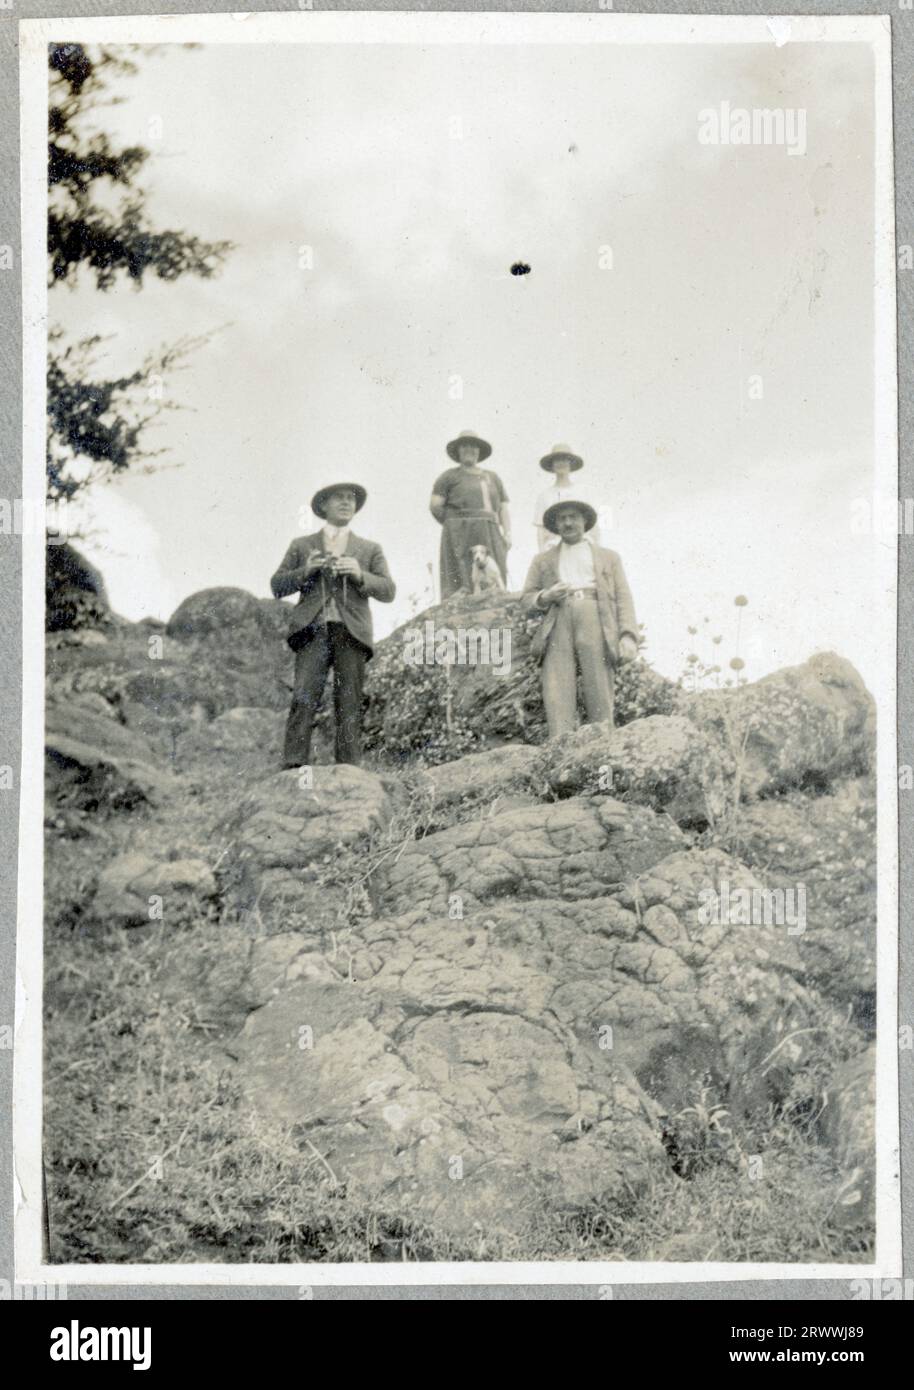 A European man leaning casually against some rocks, almost certainly Charles Bungey's older brother William Walter, who also lived in Kenya. Original manuscript caption: W.W.B. Xmas 1924. Stock Photo